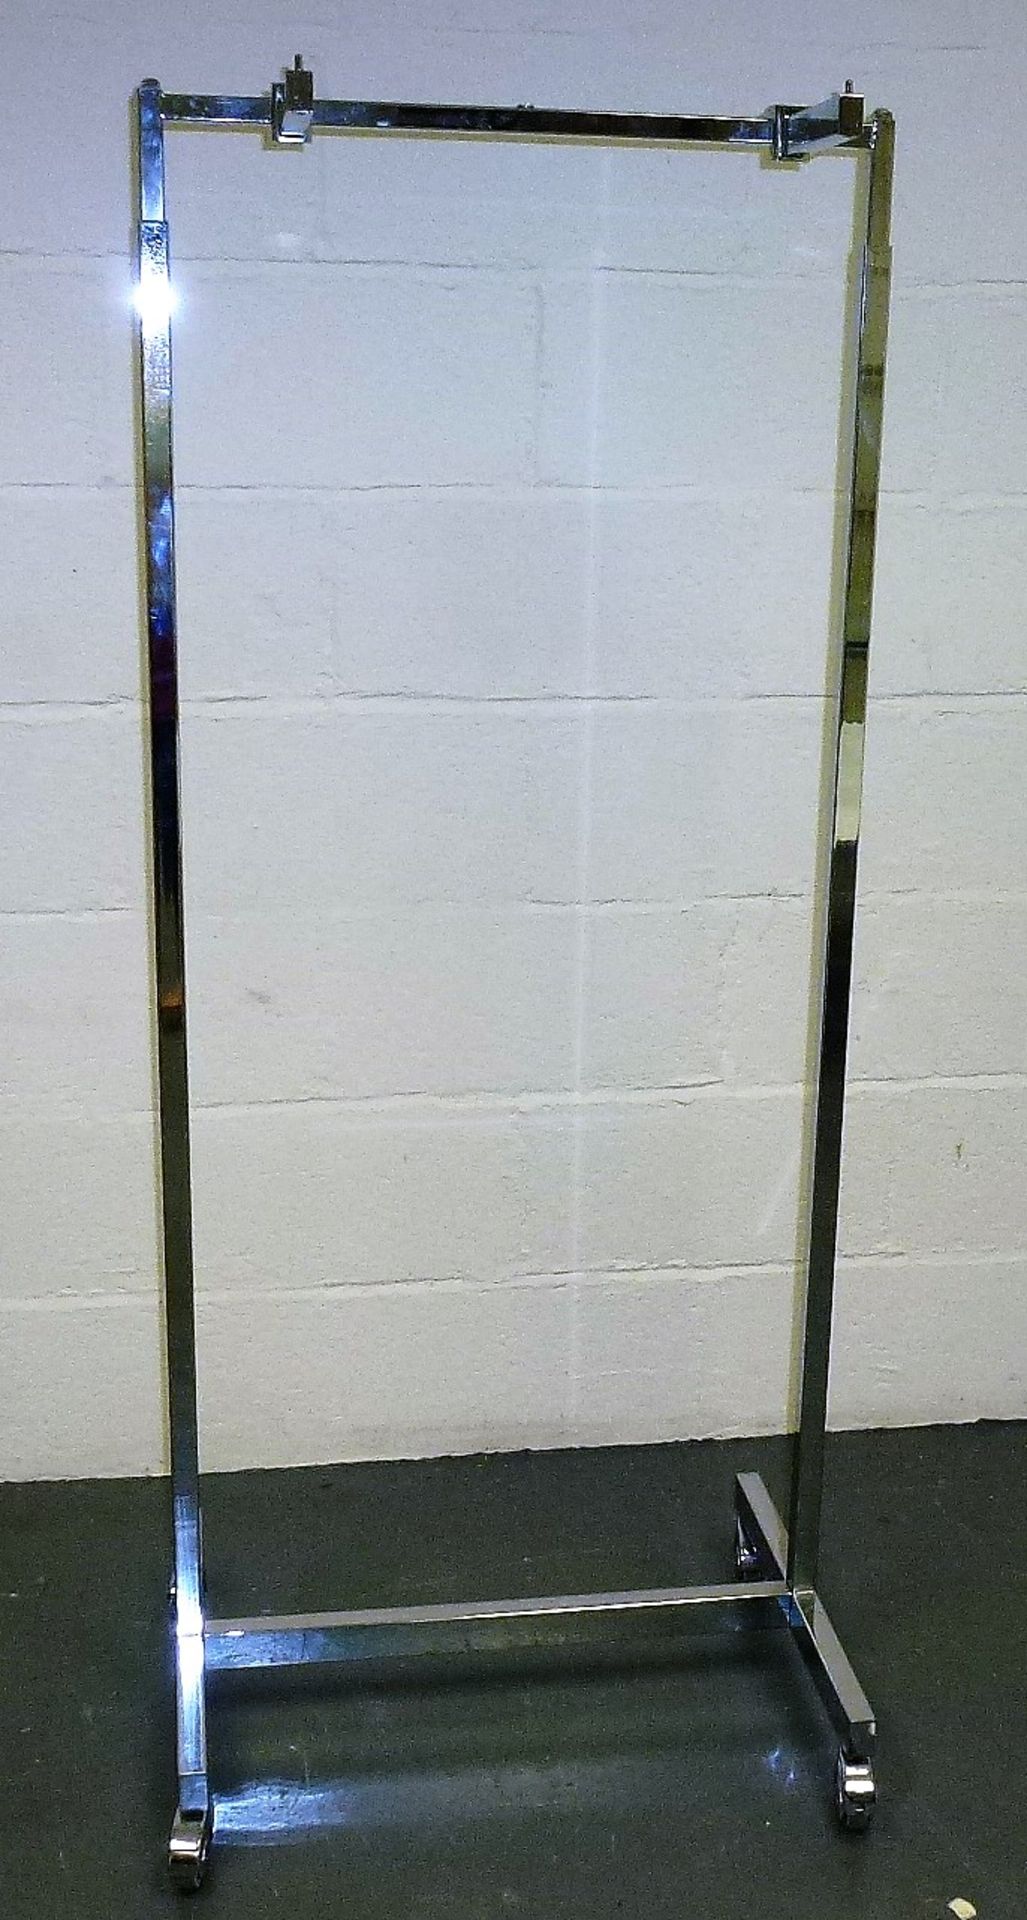 2 x Clothing rails wheeled - adjustable height H x 1200/1500 W x 1000 D x 420 - Image 2 of 2